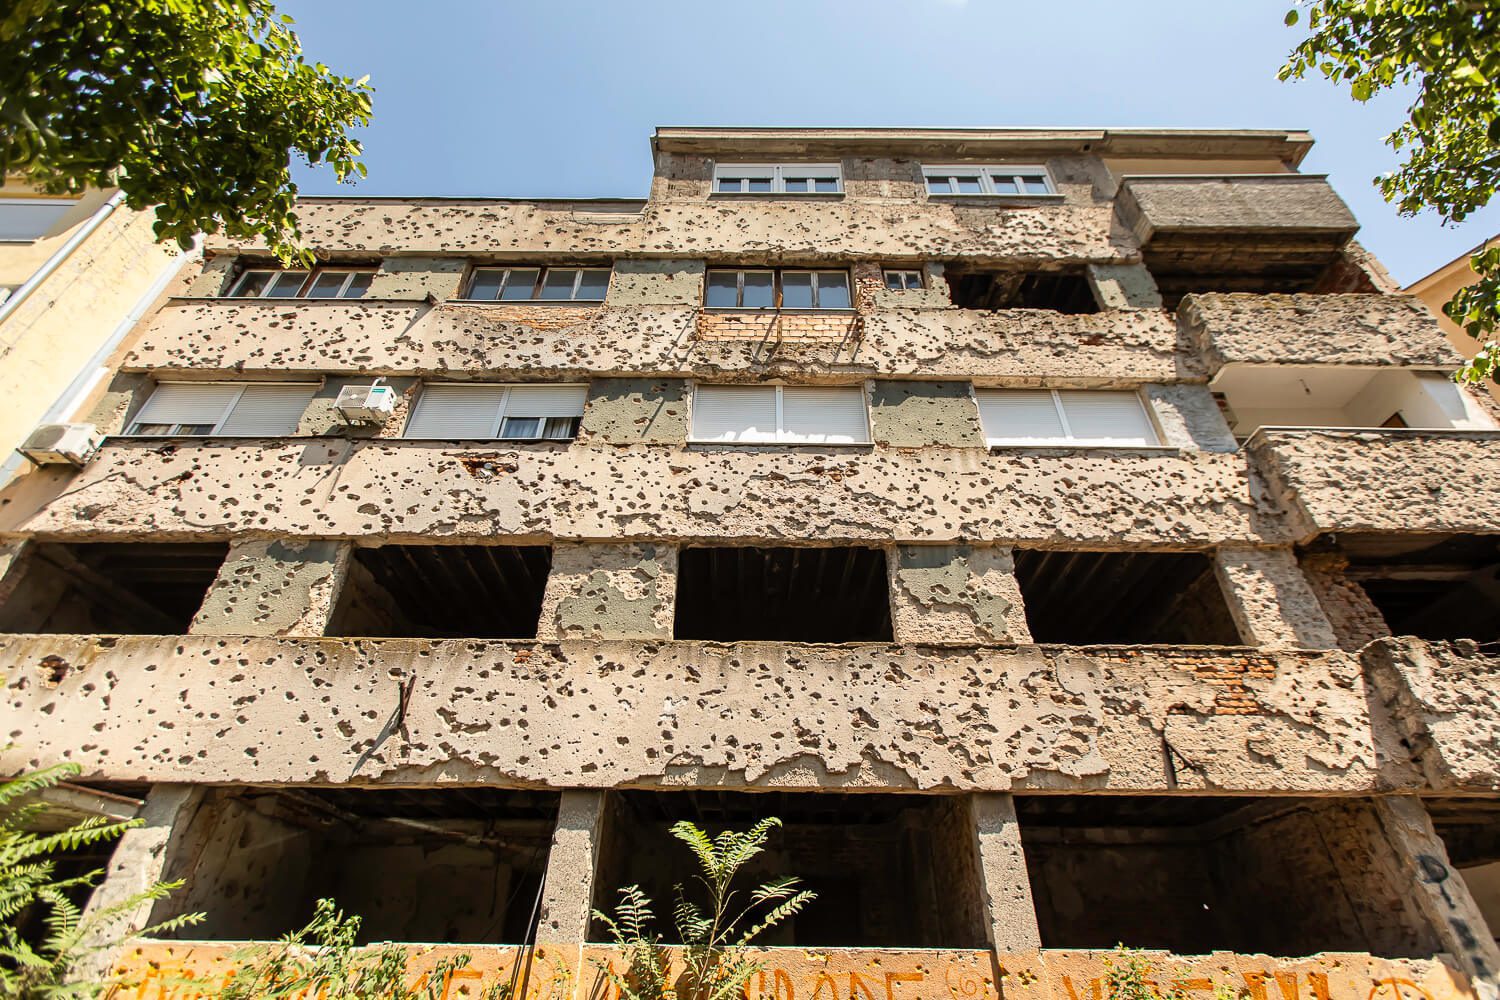 Building with bullet holes in Bosnia 